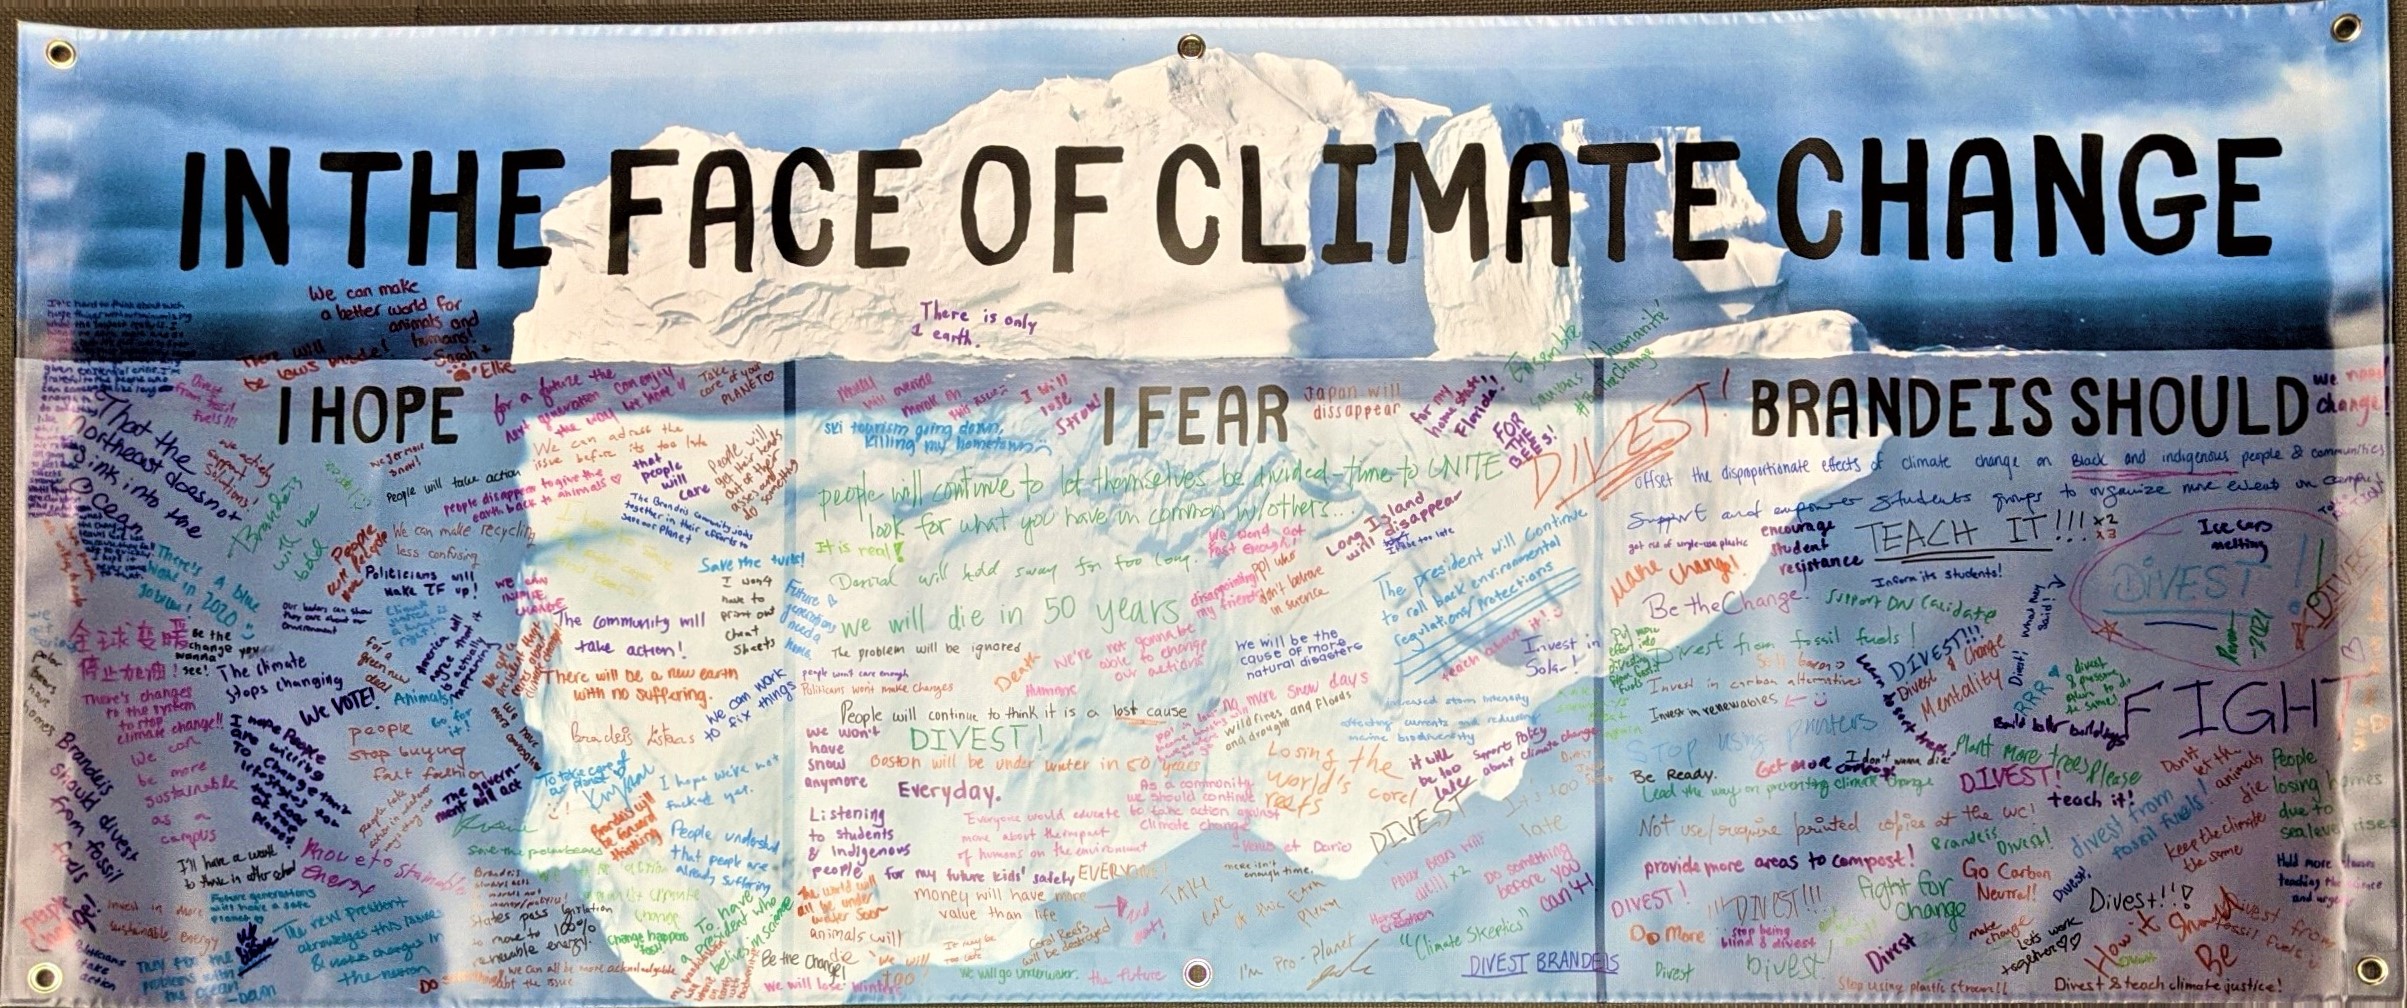 Image of banner that says “In the face of climate change, I hope/ I fear/ Brandeis should.” 